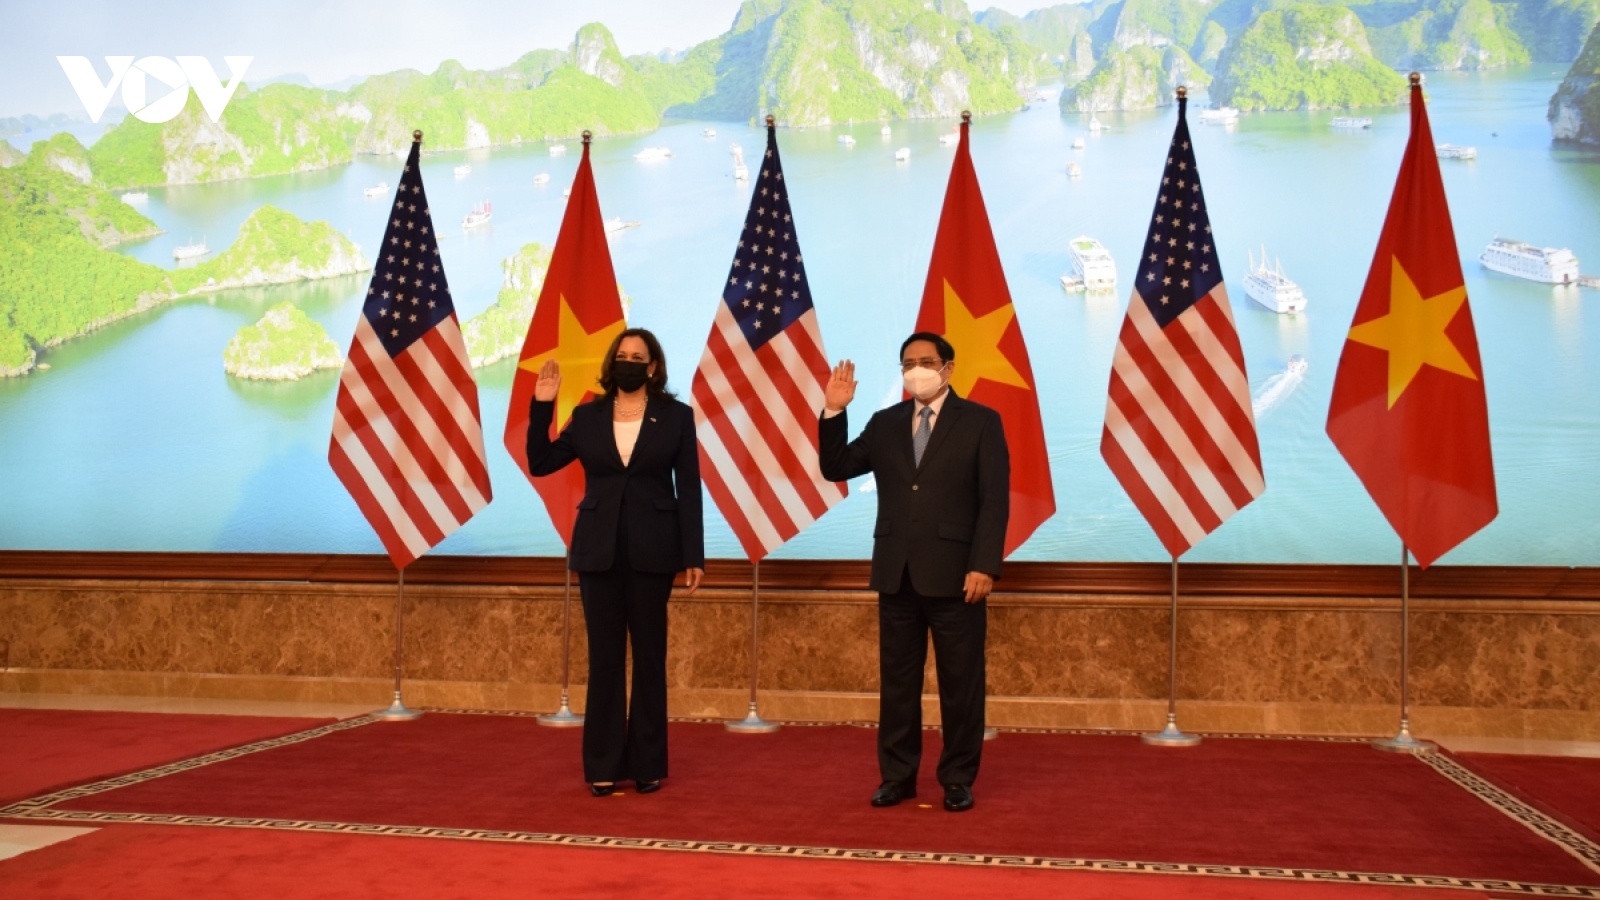 Economy-trade considered a pillar and driving force behind Vietnam-US relations